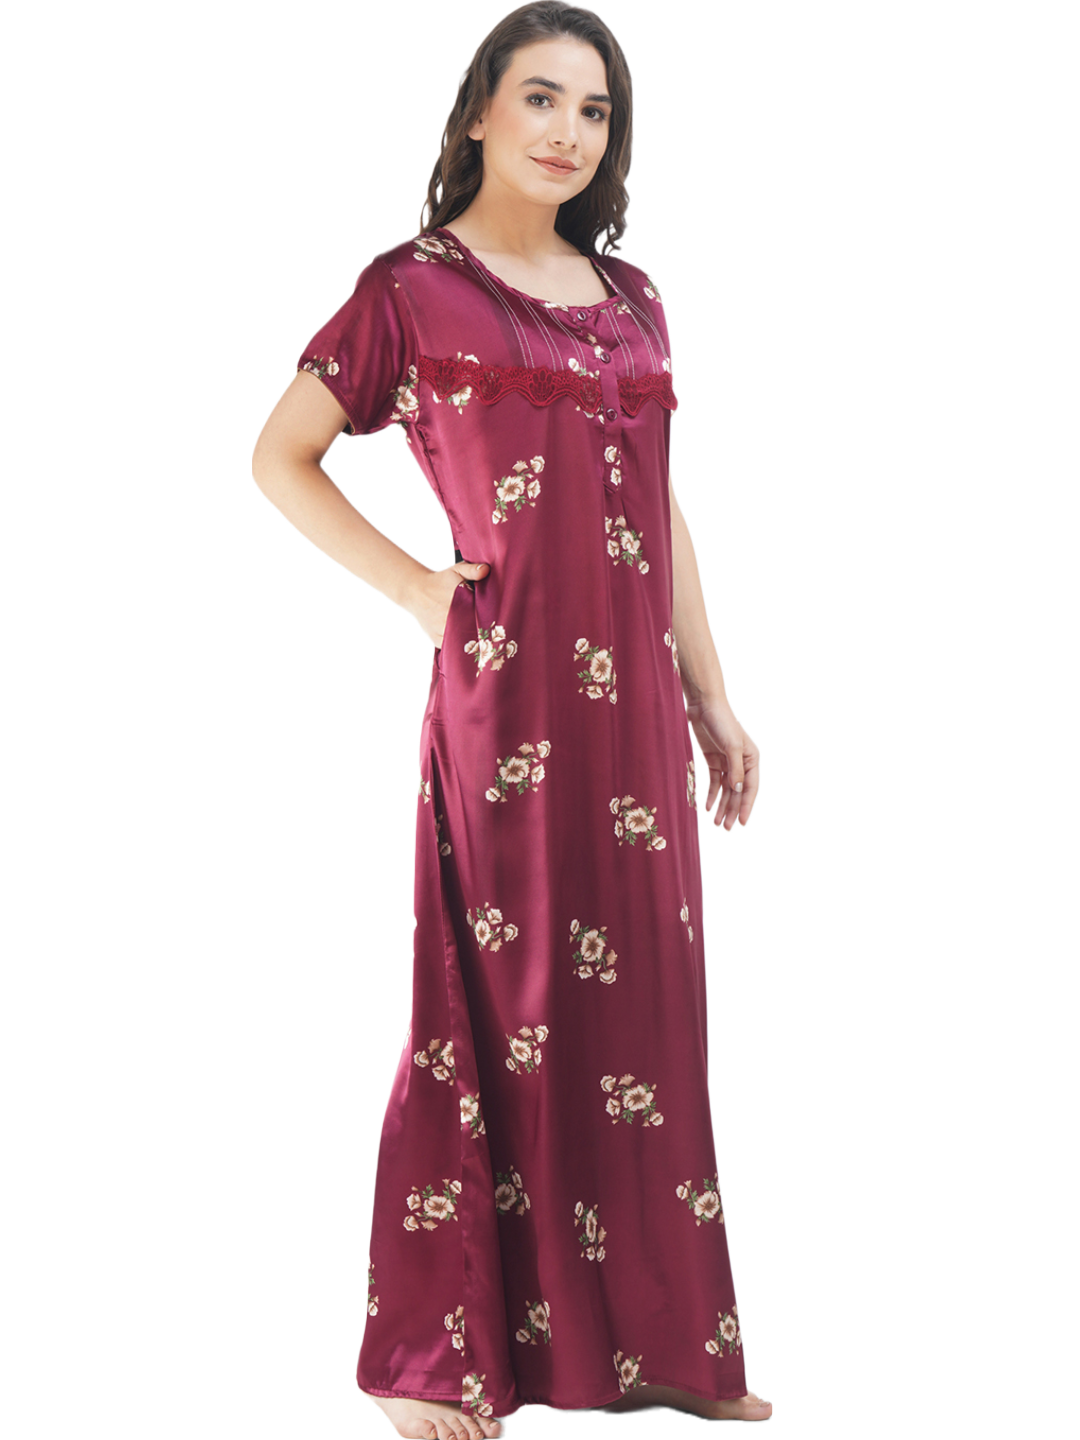 Satin Night gown with Floral print